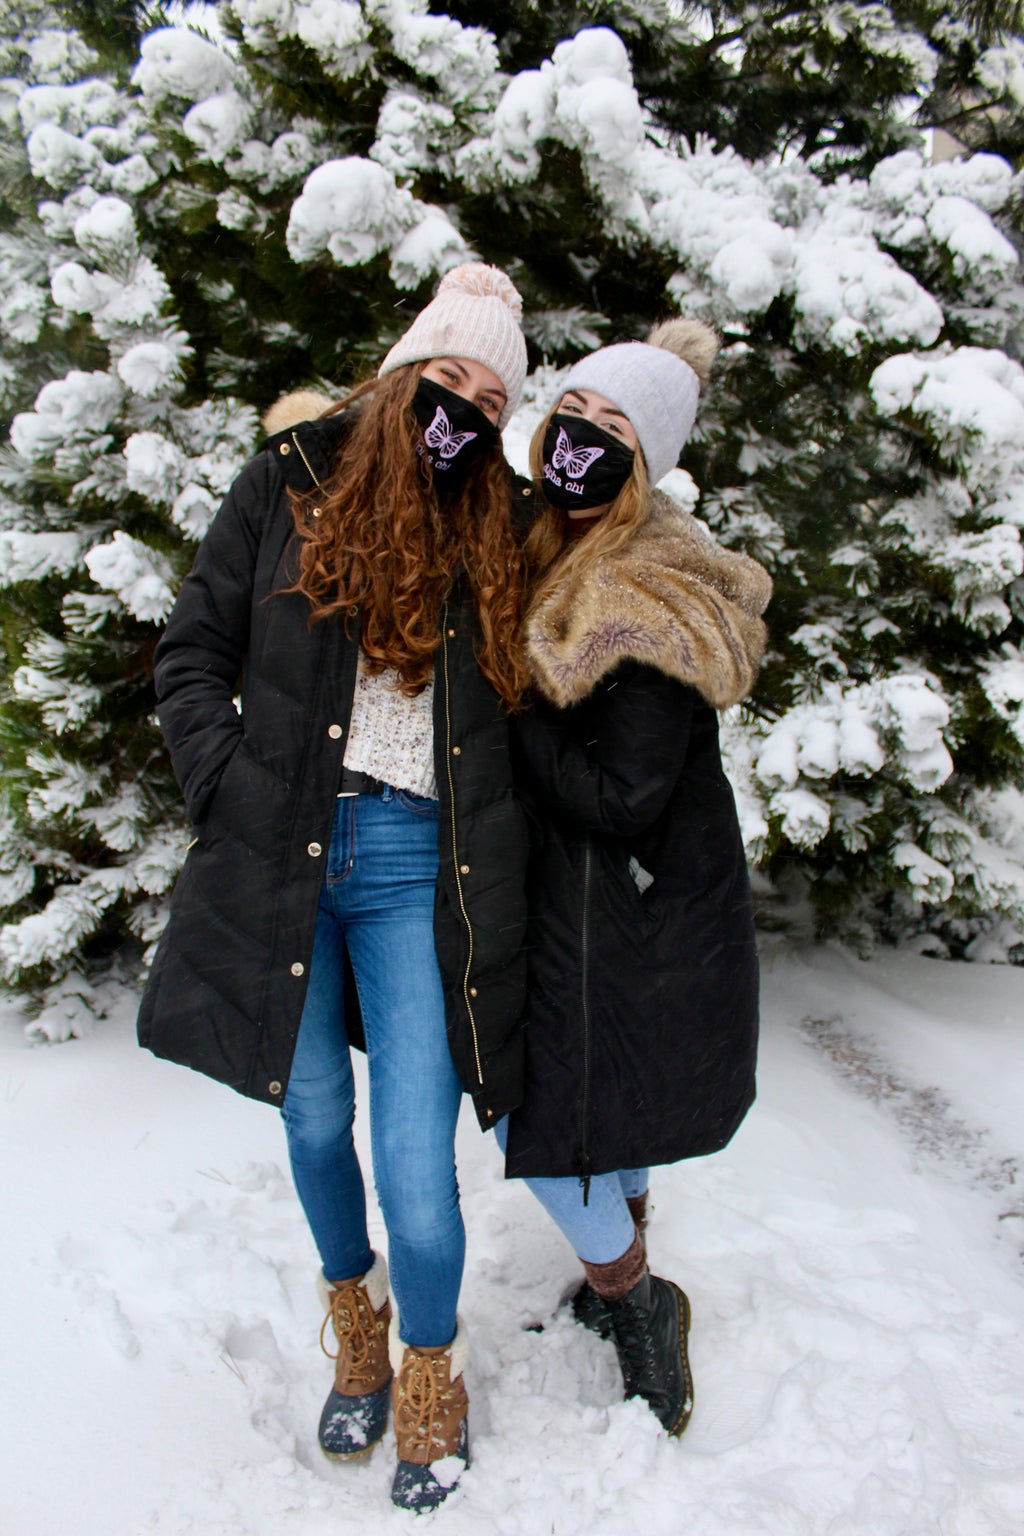 Two women posing for a picture in the snow on campus